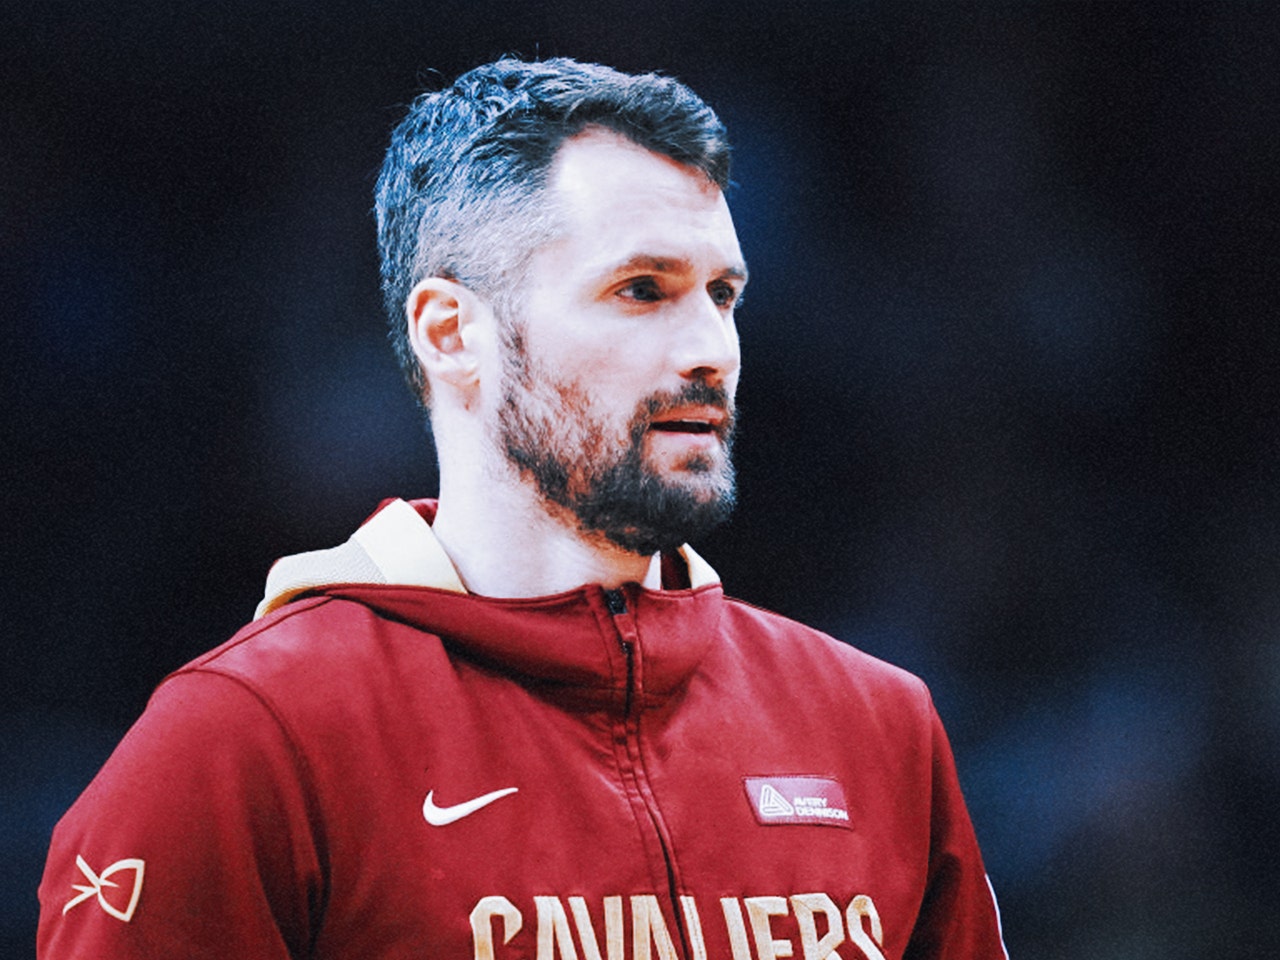 Kevin Love signs with Miami, moving fast after clearing waivers